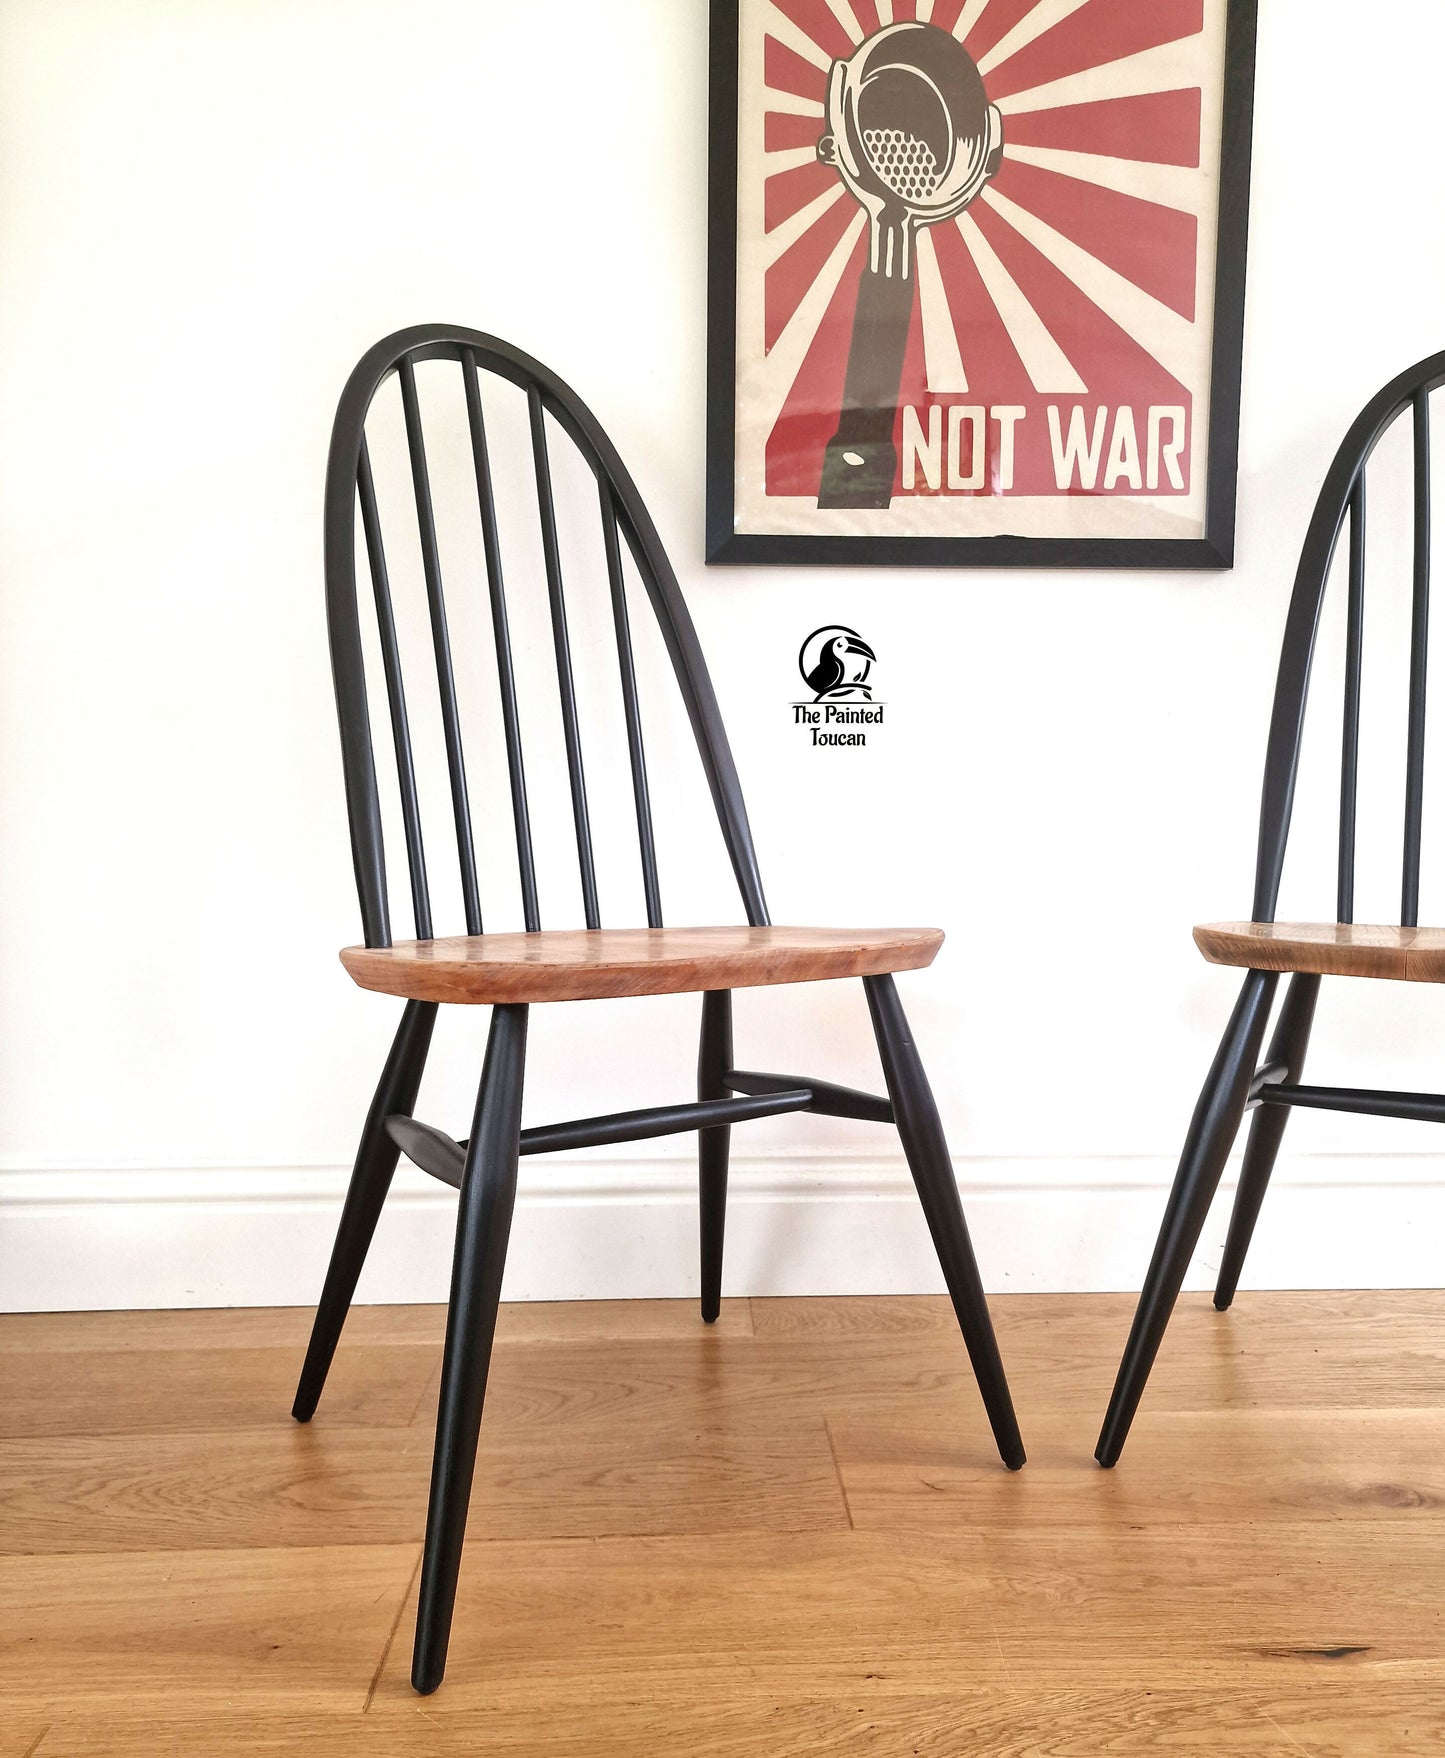 Pair of Ercol Chairs - Black